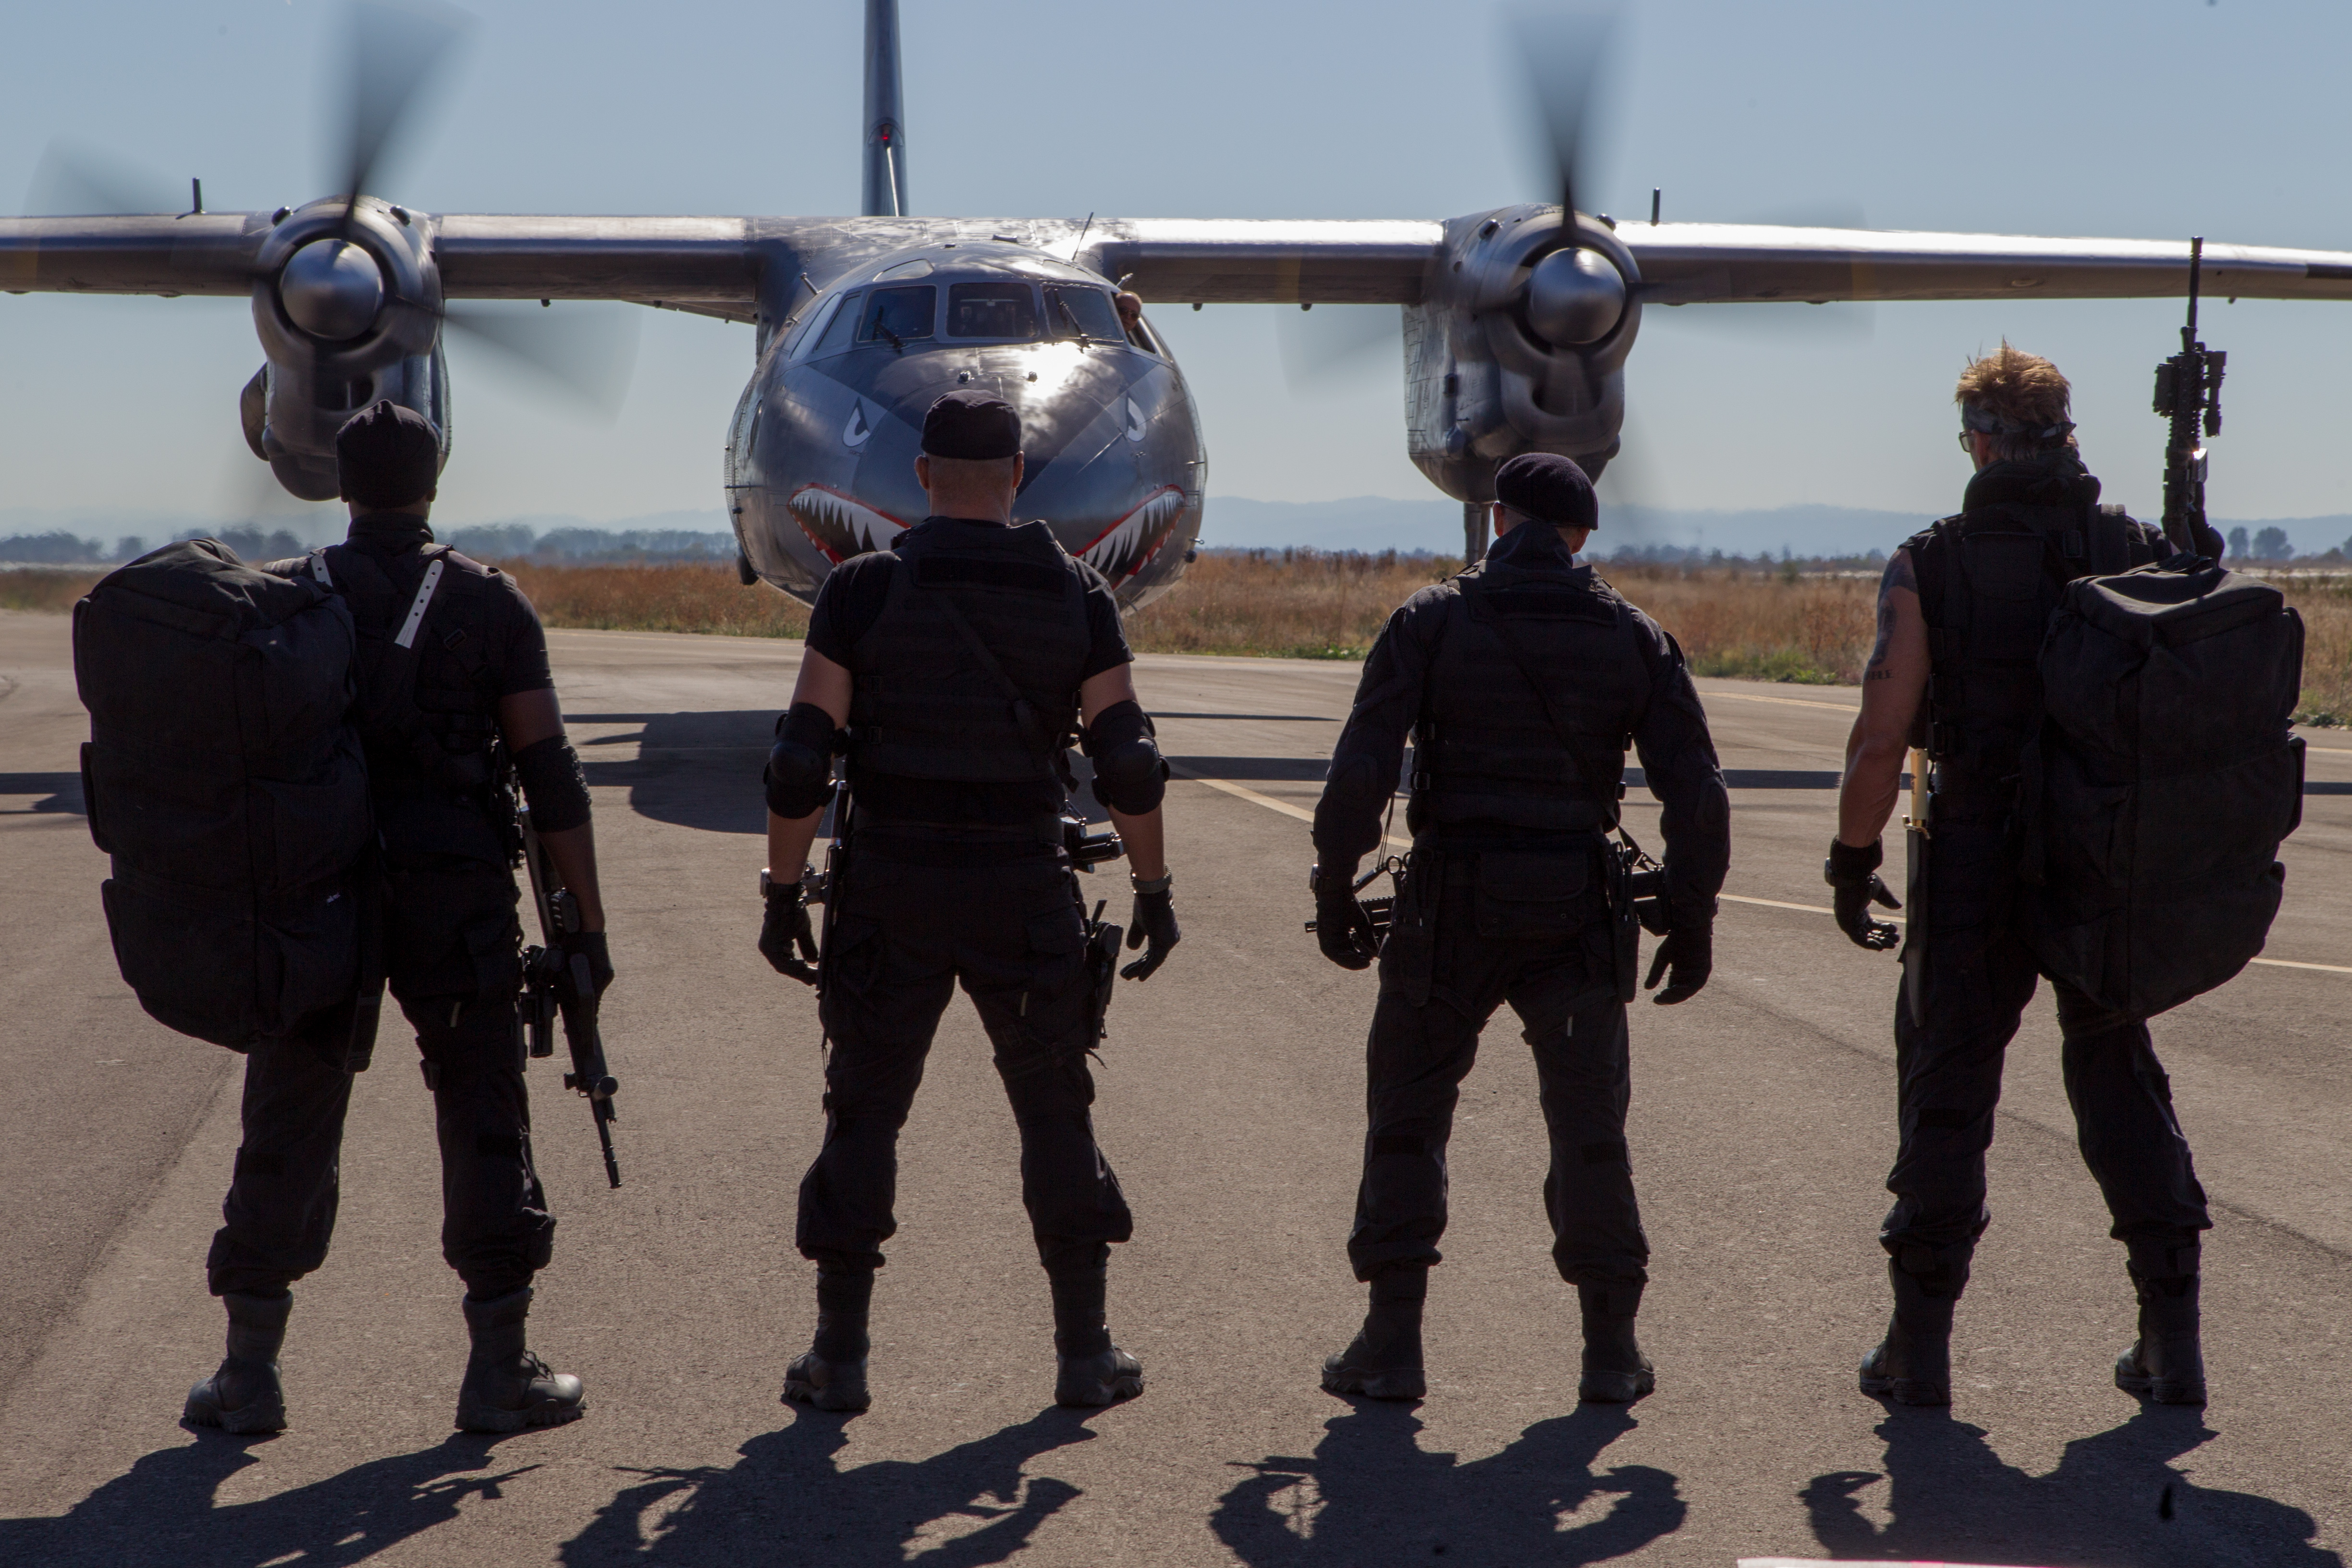 movie, the expendables 3, doc (the expendables), dolph lundgren, gunnar jensen, jason statham, lee christmas, randy couture, toll road, wesley snipes, the expendables 4K Ultra